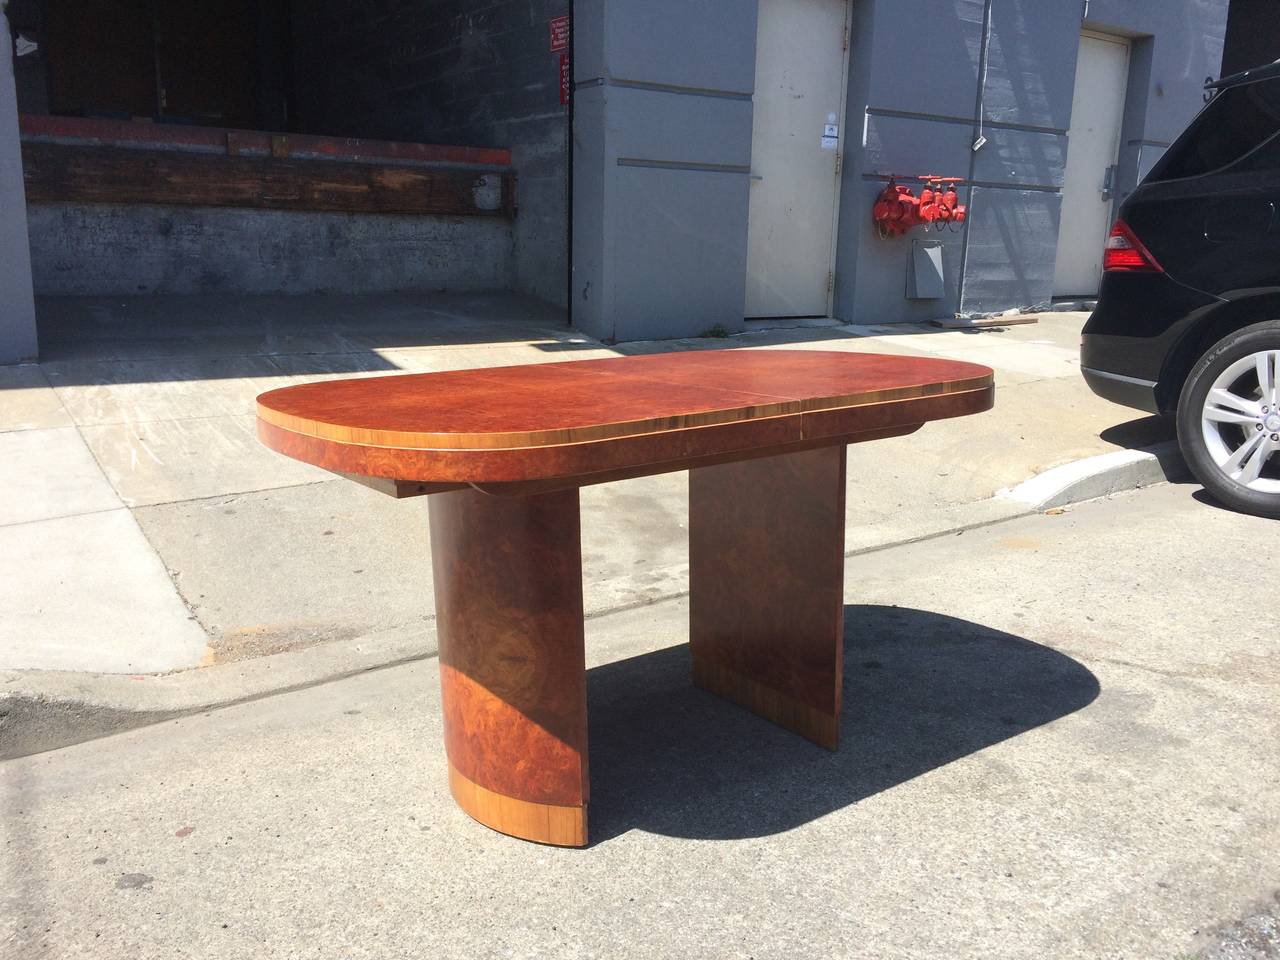 Art Deco Dining Table in the Style of Marcel Guillemard
circa 1930
burl wood veneer
approx 60 x 36 x 26 inches high (plus leaf which nestles inside table)
Very good condition